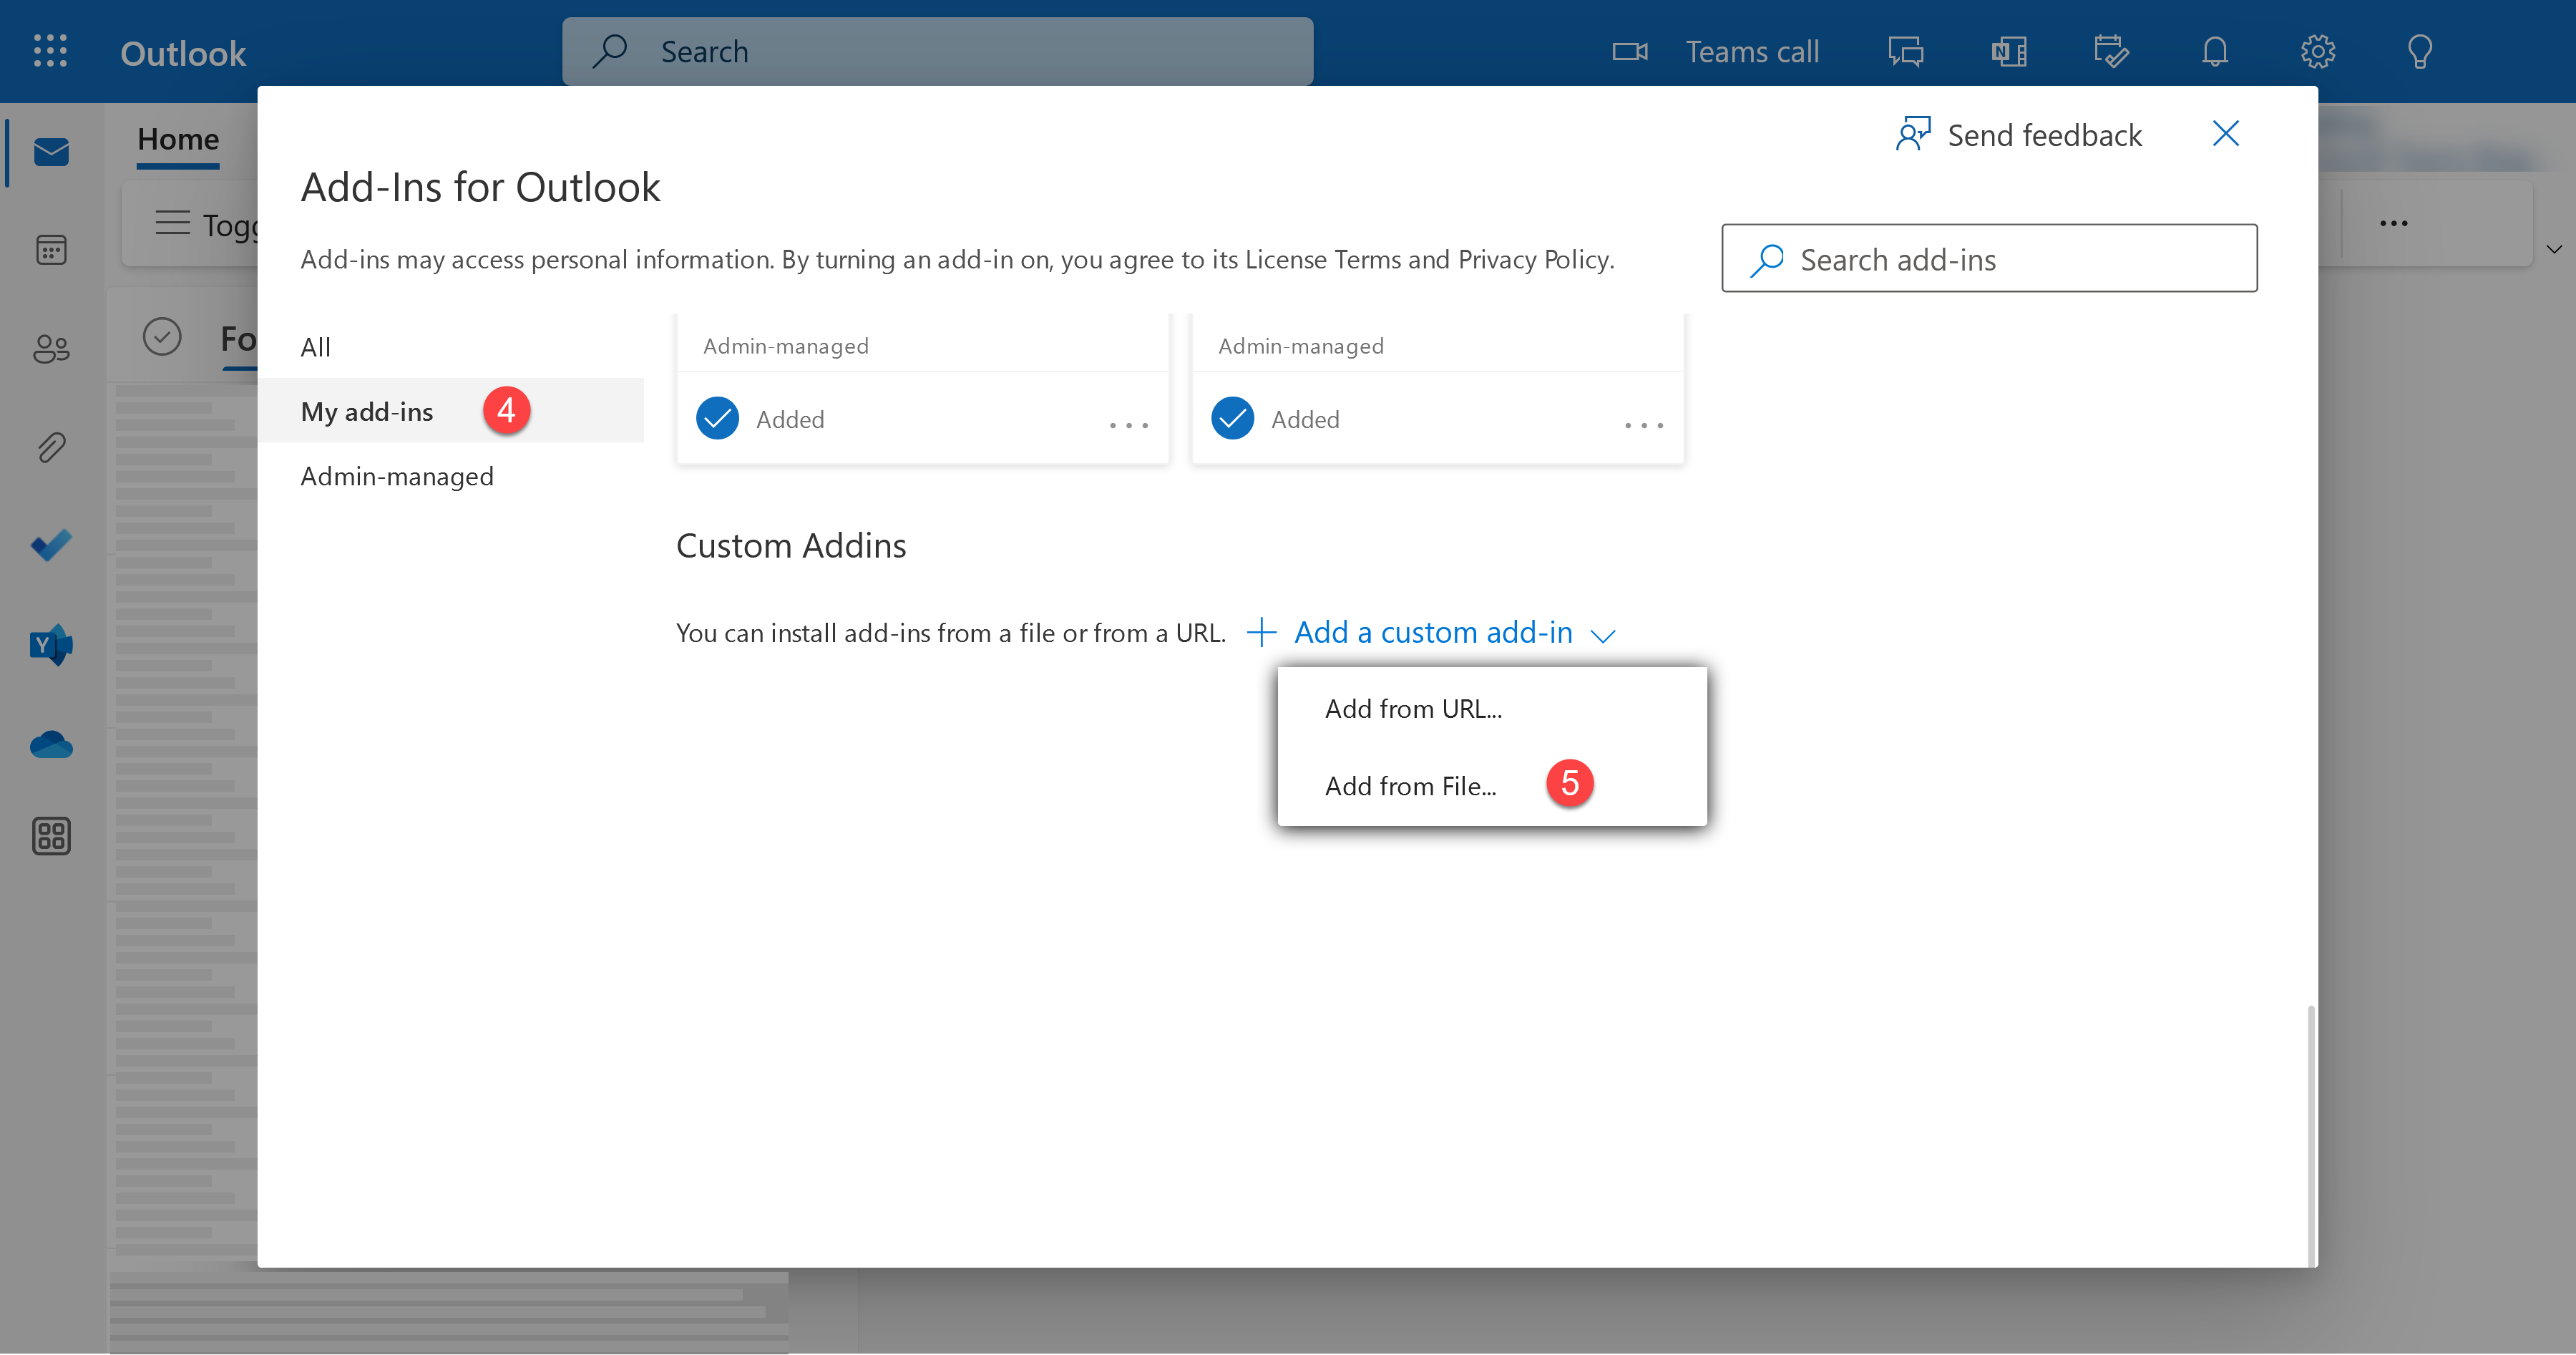 Add-Ins for Outlook menu